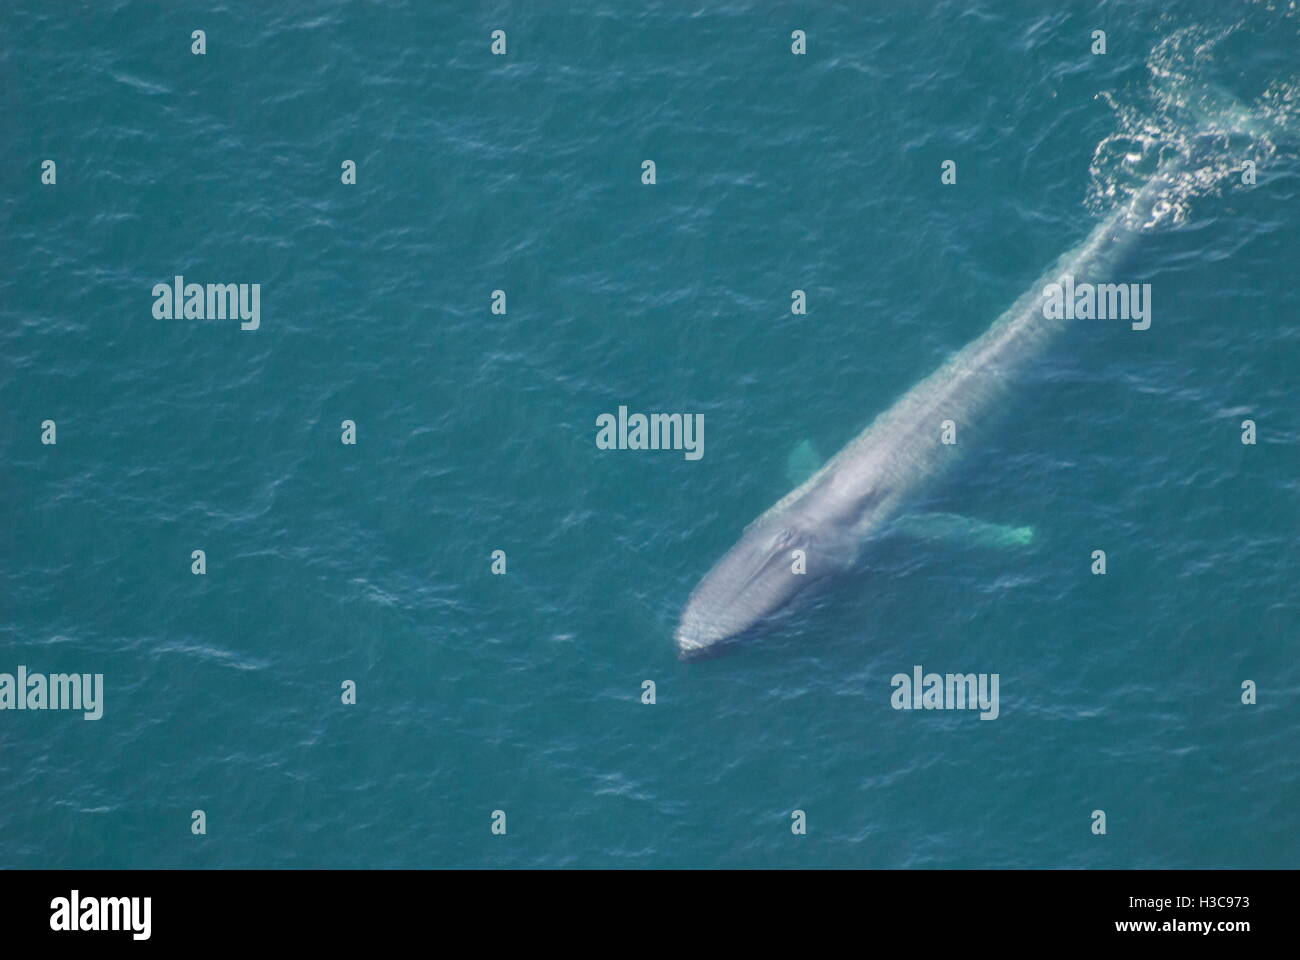 Adult Blue Whale((Balaenoptera musculus) aerial view off of Channel Islands, California, USA Stock Photo